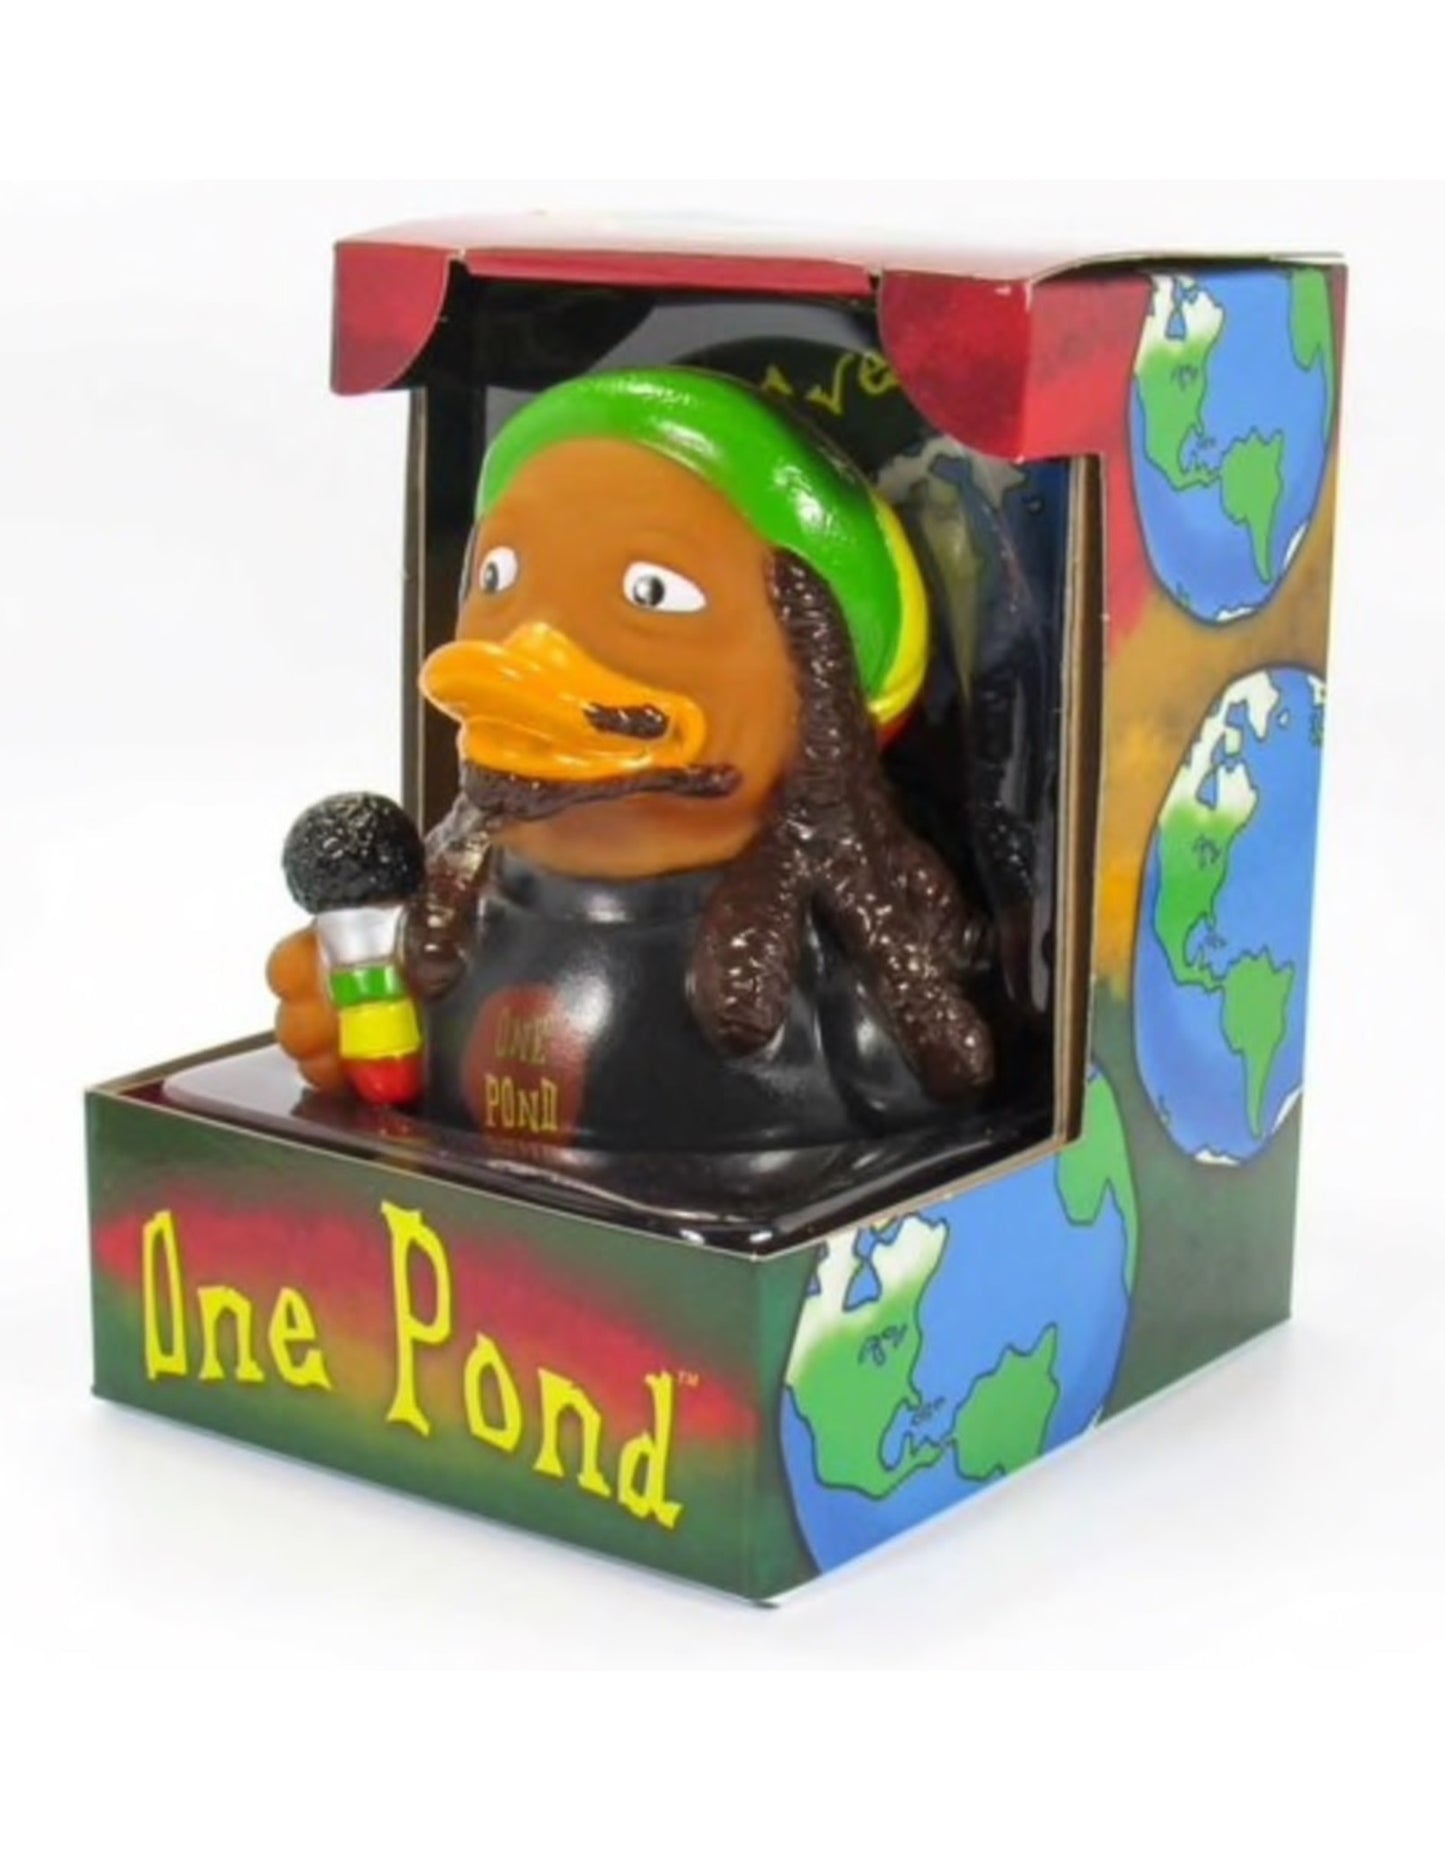 Bob Marley "One Pond" Rubber Duck